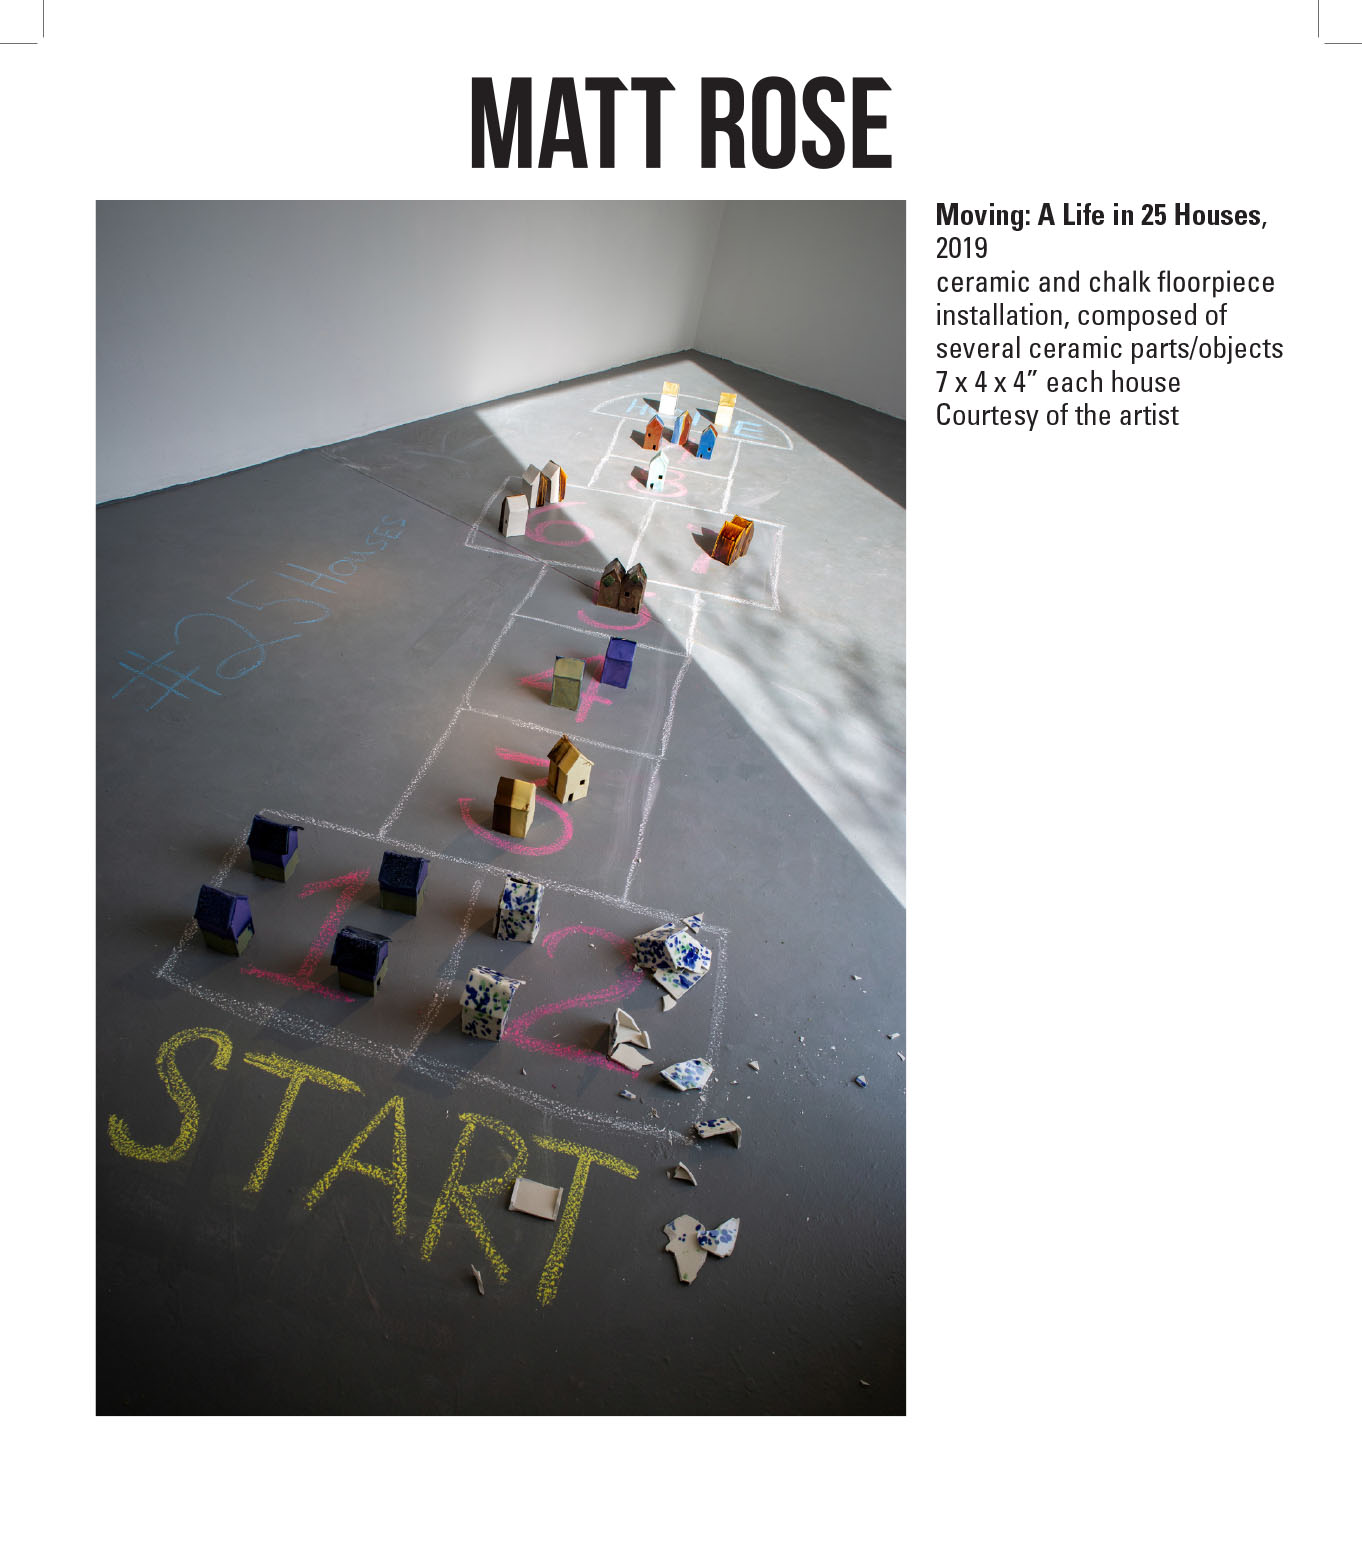 Matt Rose, Moving: A Life in 25 Houses,  2019. Ceramic and chalk floorpiece installation, composed of several ceramic parts/objects. 7 x 4 x 4” each house. Courtesy of the artist. A series of small house sculptures places on top of a chalk hop-scotch drawing